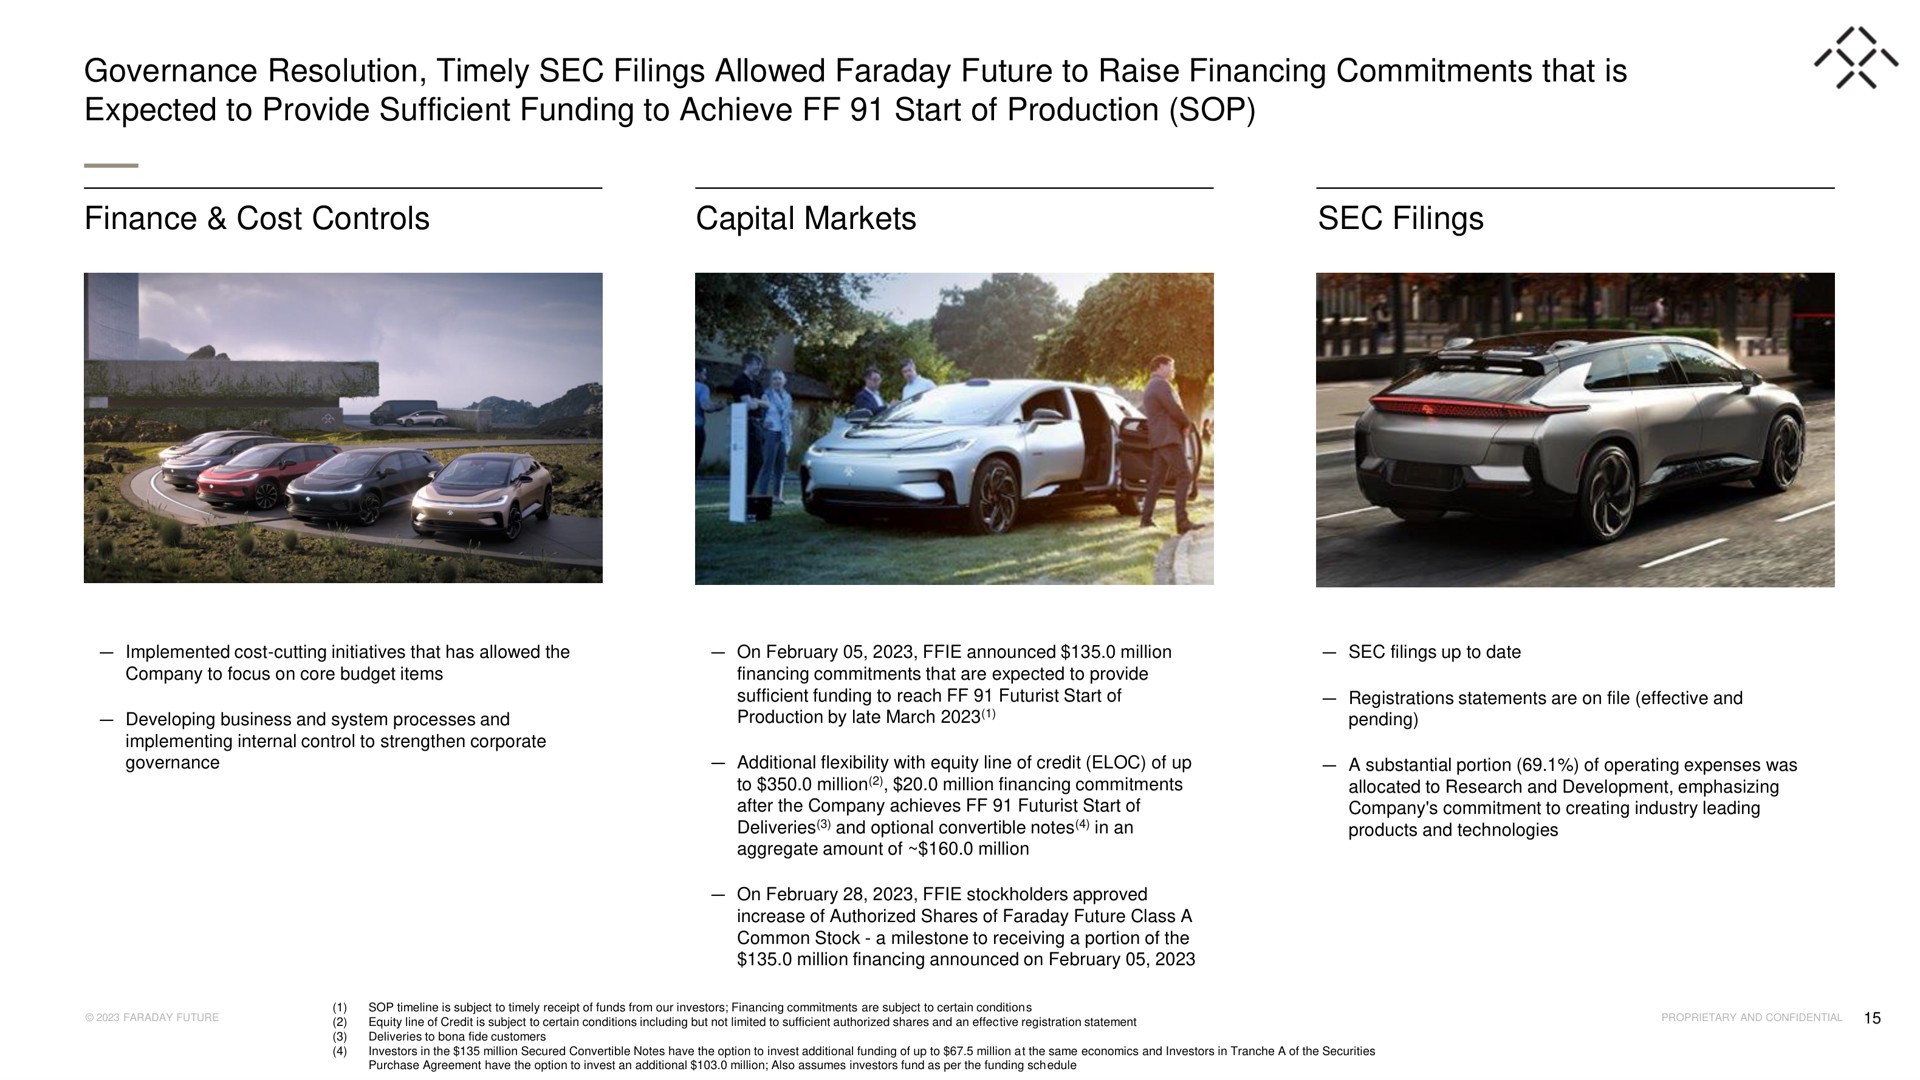 governance resolution timely sec filings allowed faraday future to raise financing commitments that is expected to provide sufficient funding to achieve start of production sop finance cost controls capital markets sec filings a | Faraday Future